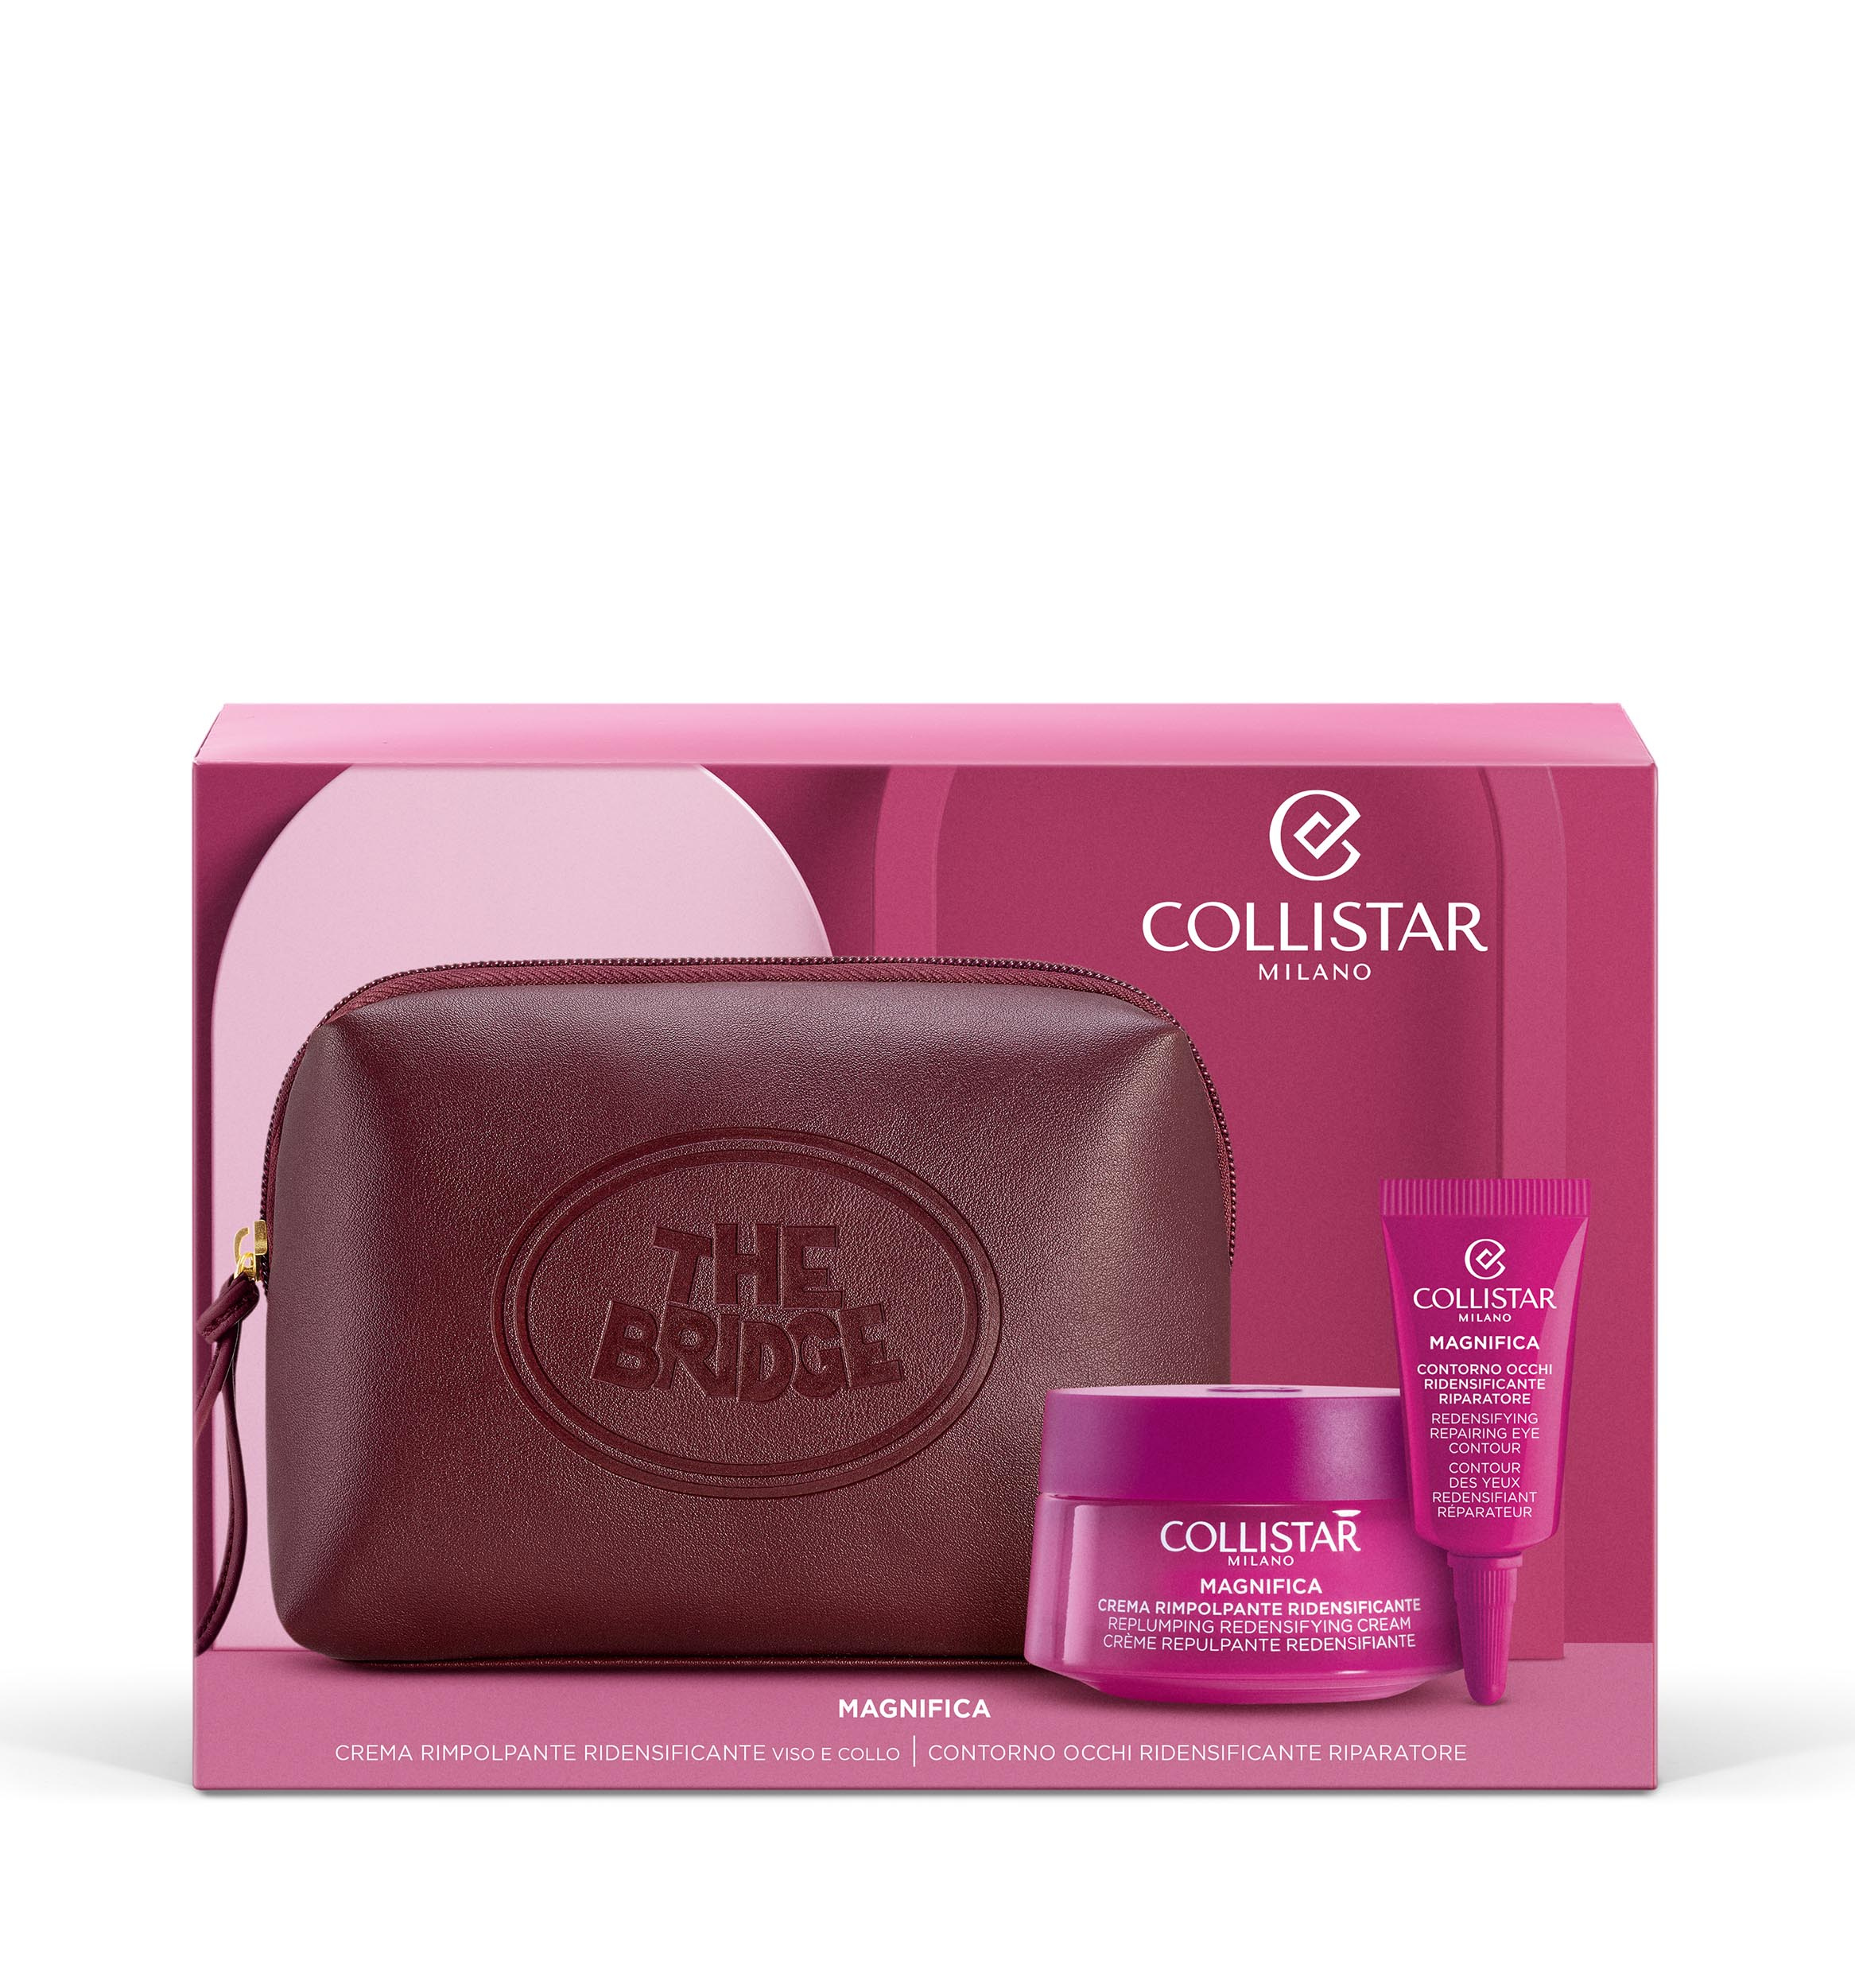 Collistar Magnifica Replumping Redensifying Cream Face And Neck, Gift Set